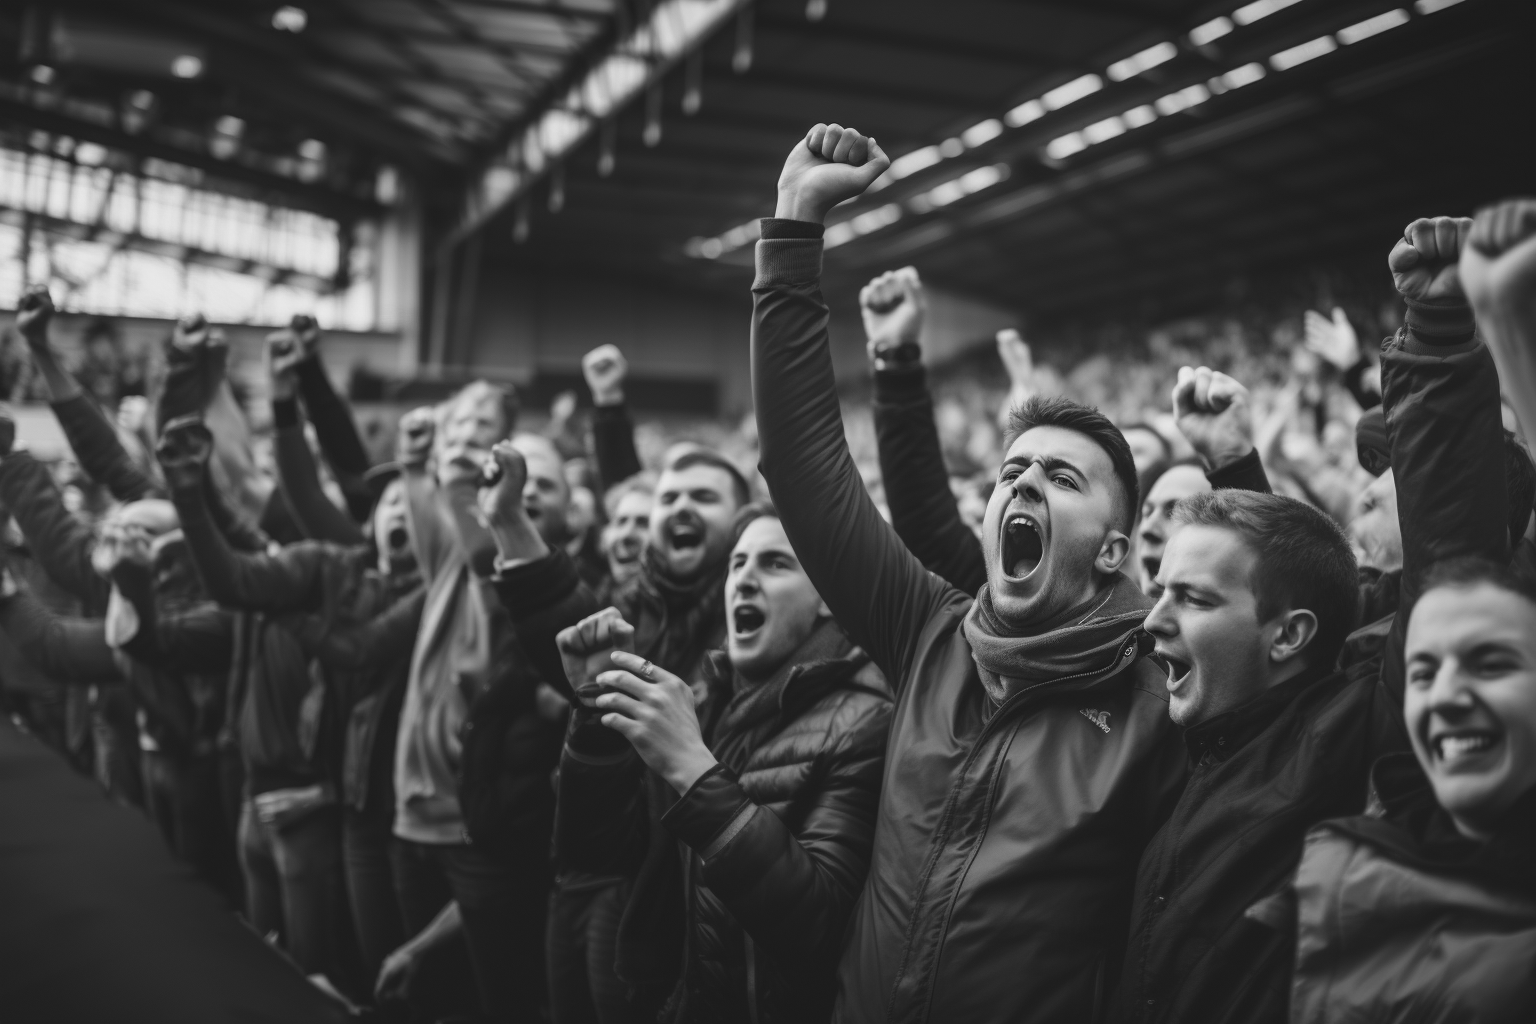 Group of excited fans cheering at an event in black and white.